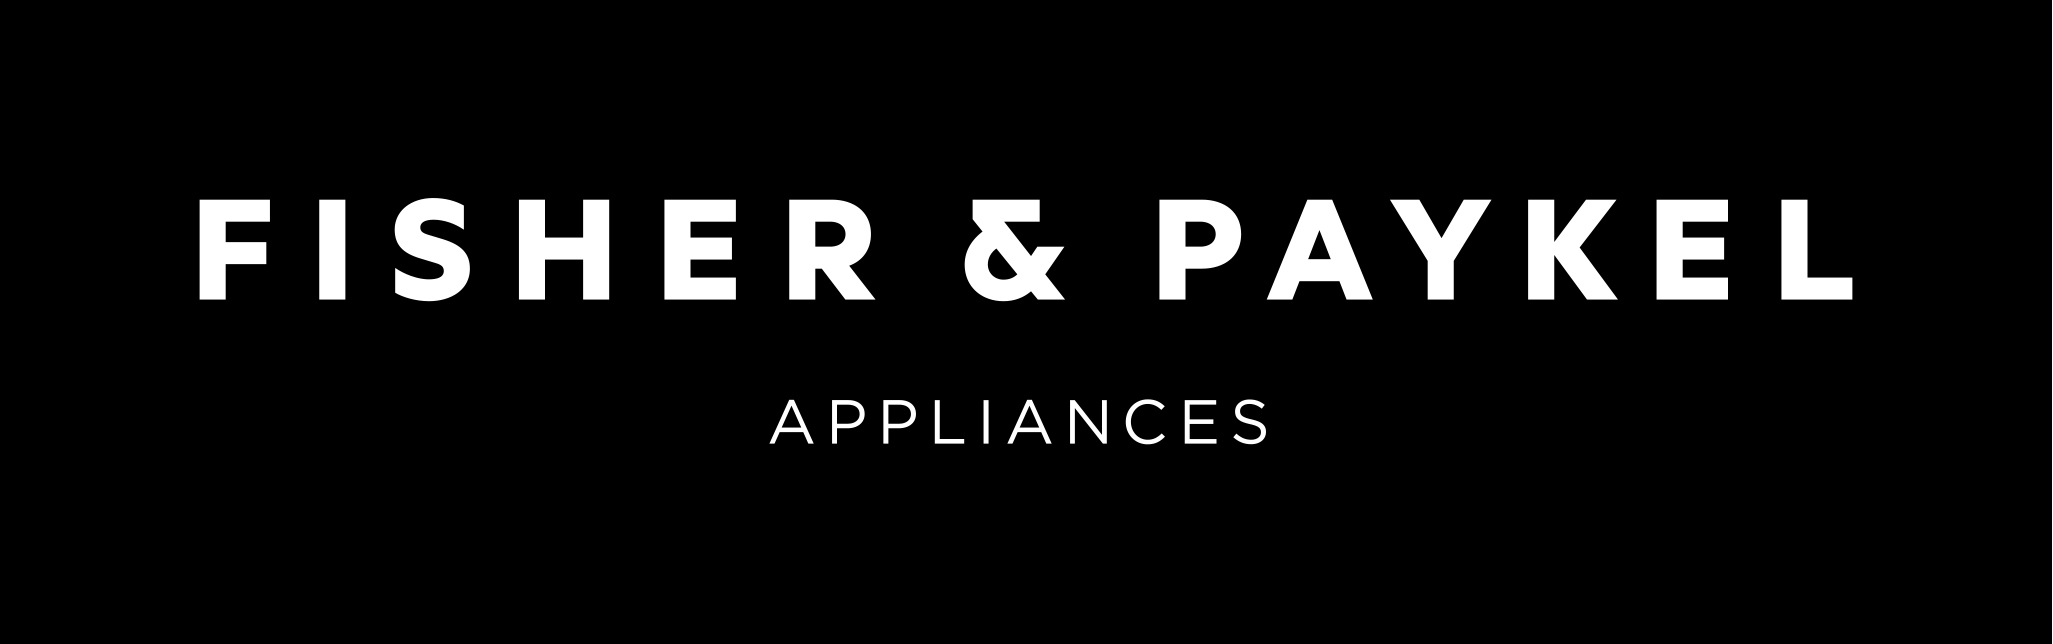 Fisher & Paykel: Preferred branded appliances